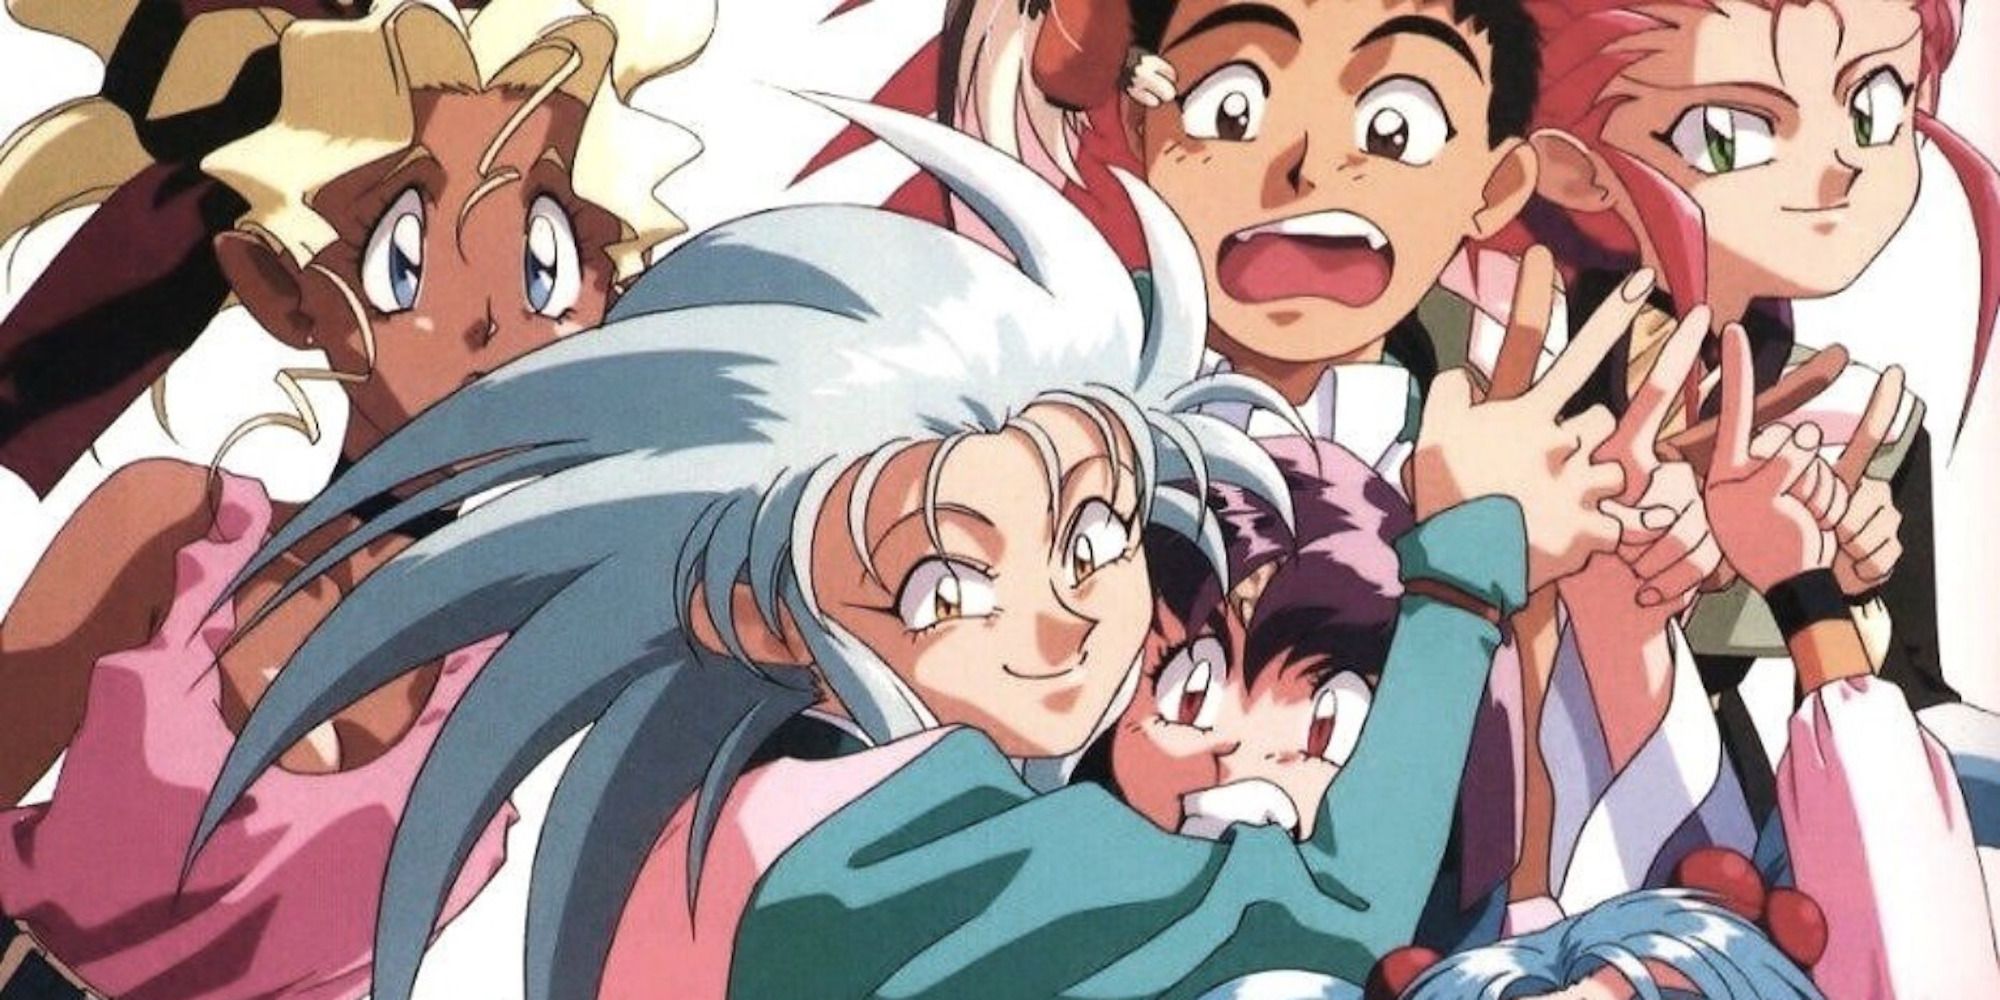 Promo art featuring the cast of Tenchi Muyo